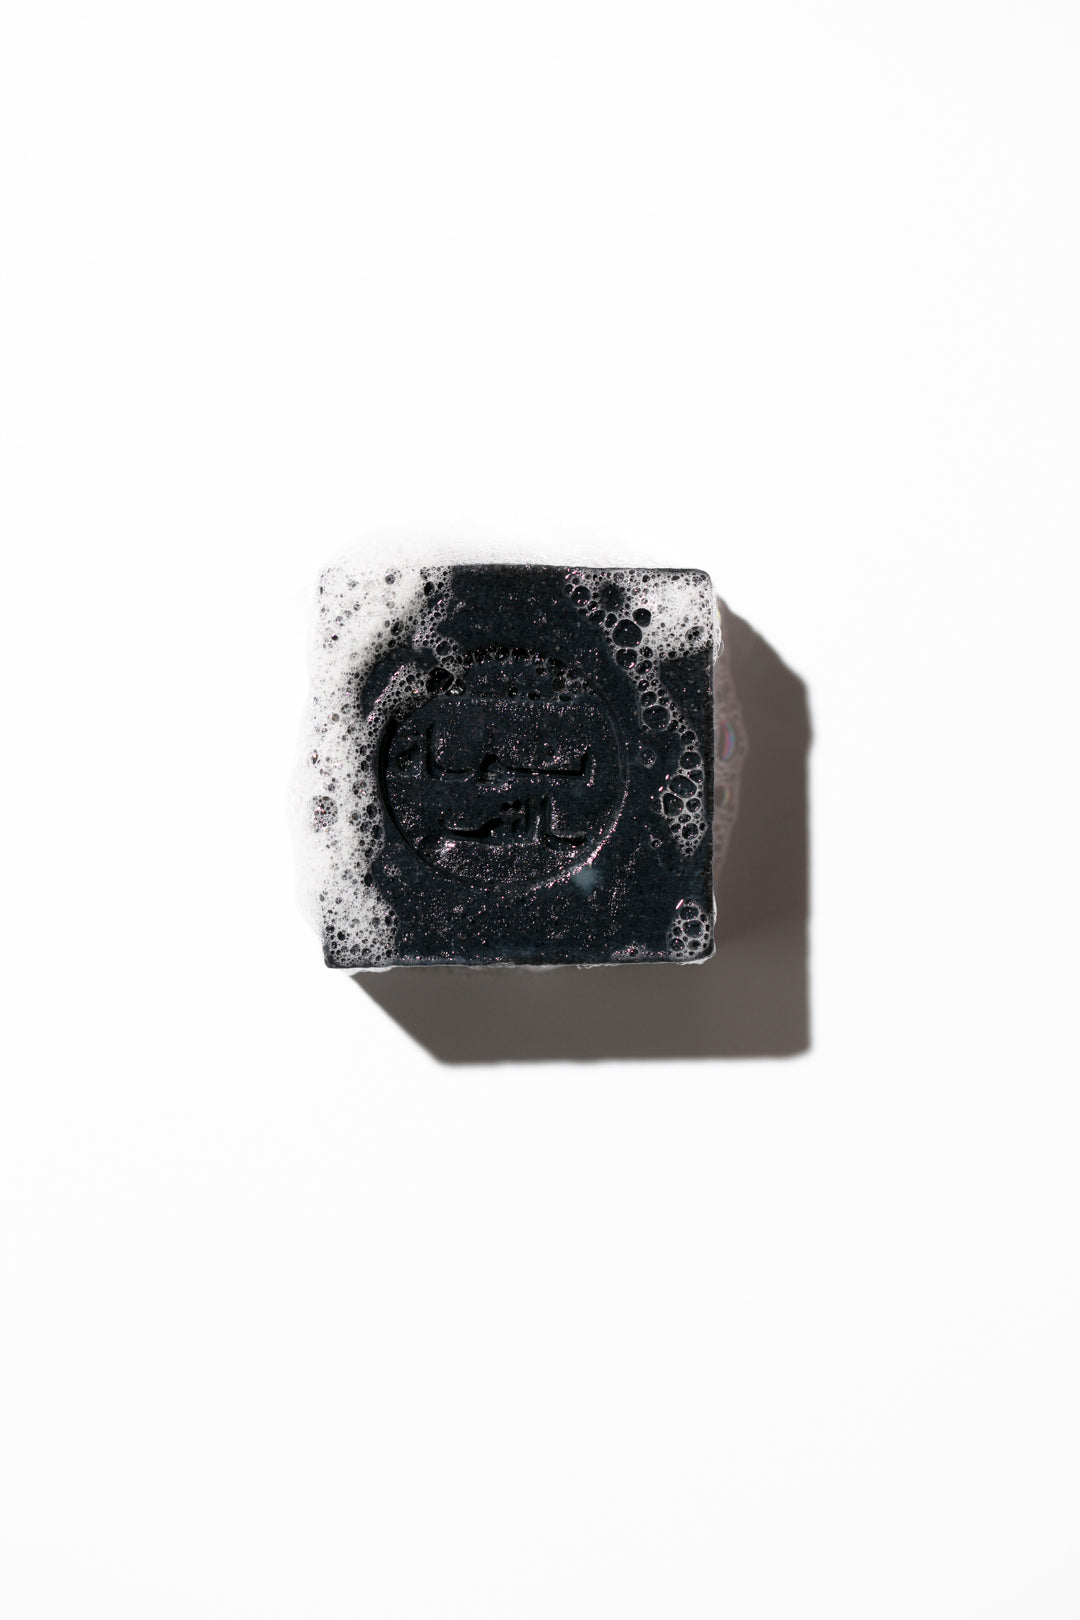 Date Seed Charcoal Bar Soap 65g